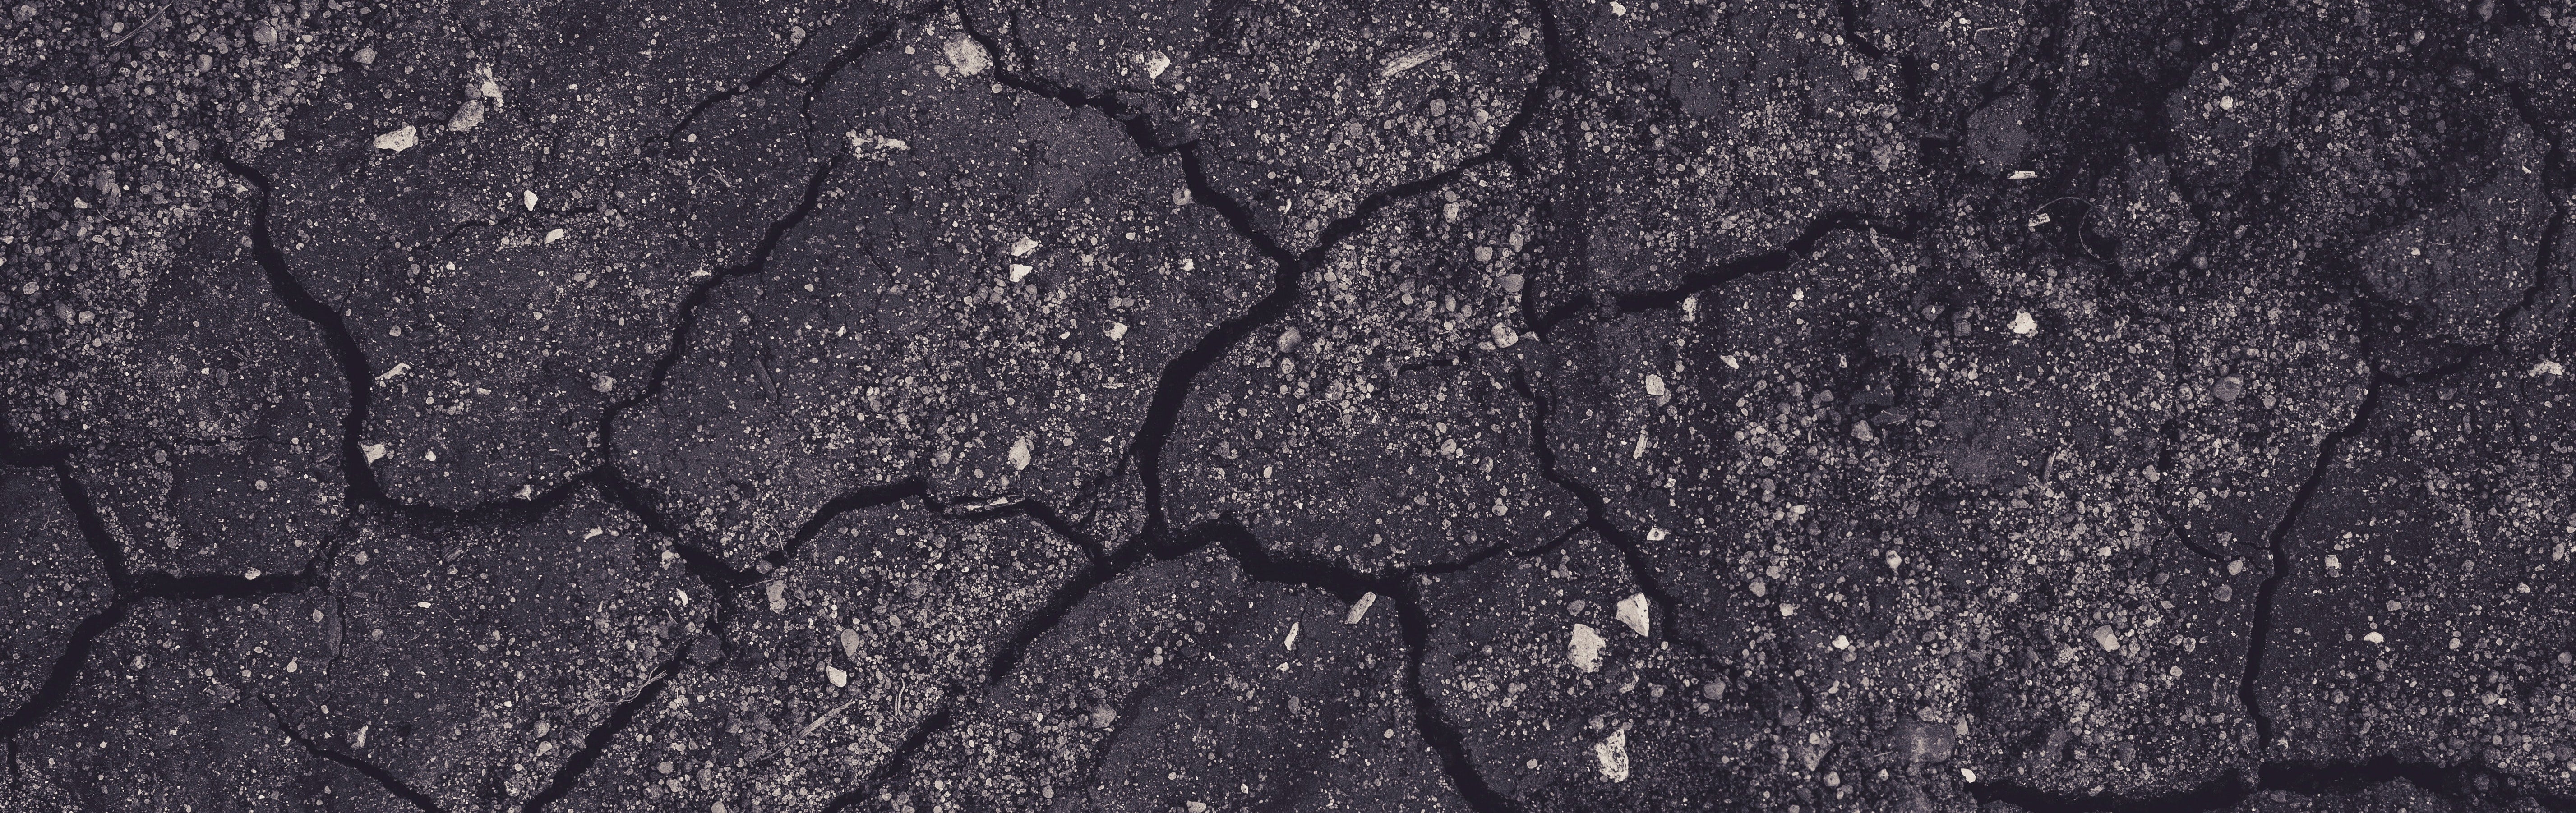 Patching a crack in your asphalt or driveway